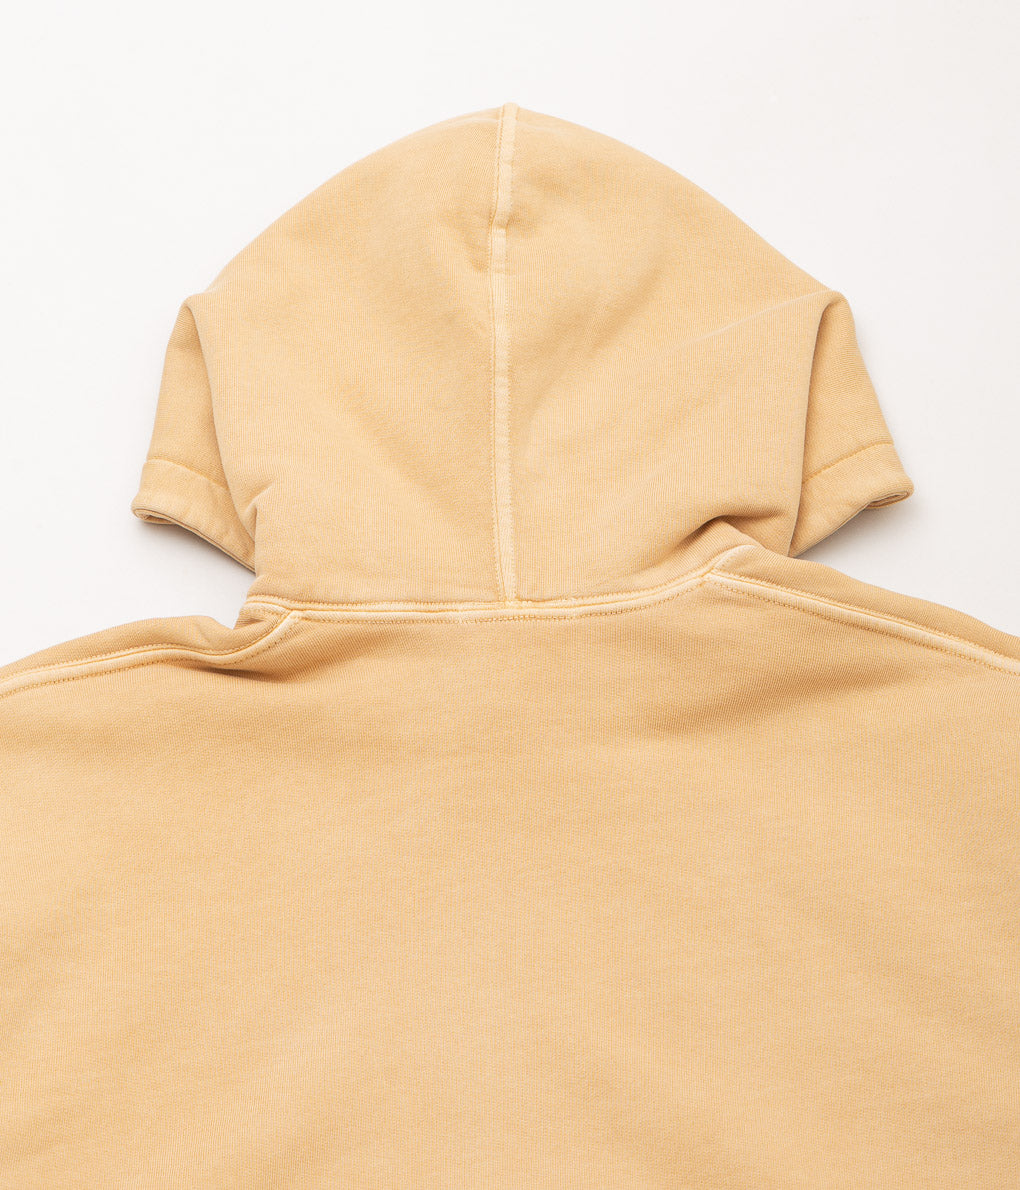 LADY WHITE CO. "MINI HOODIE"(MUSTERD PIGMENT)